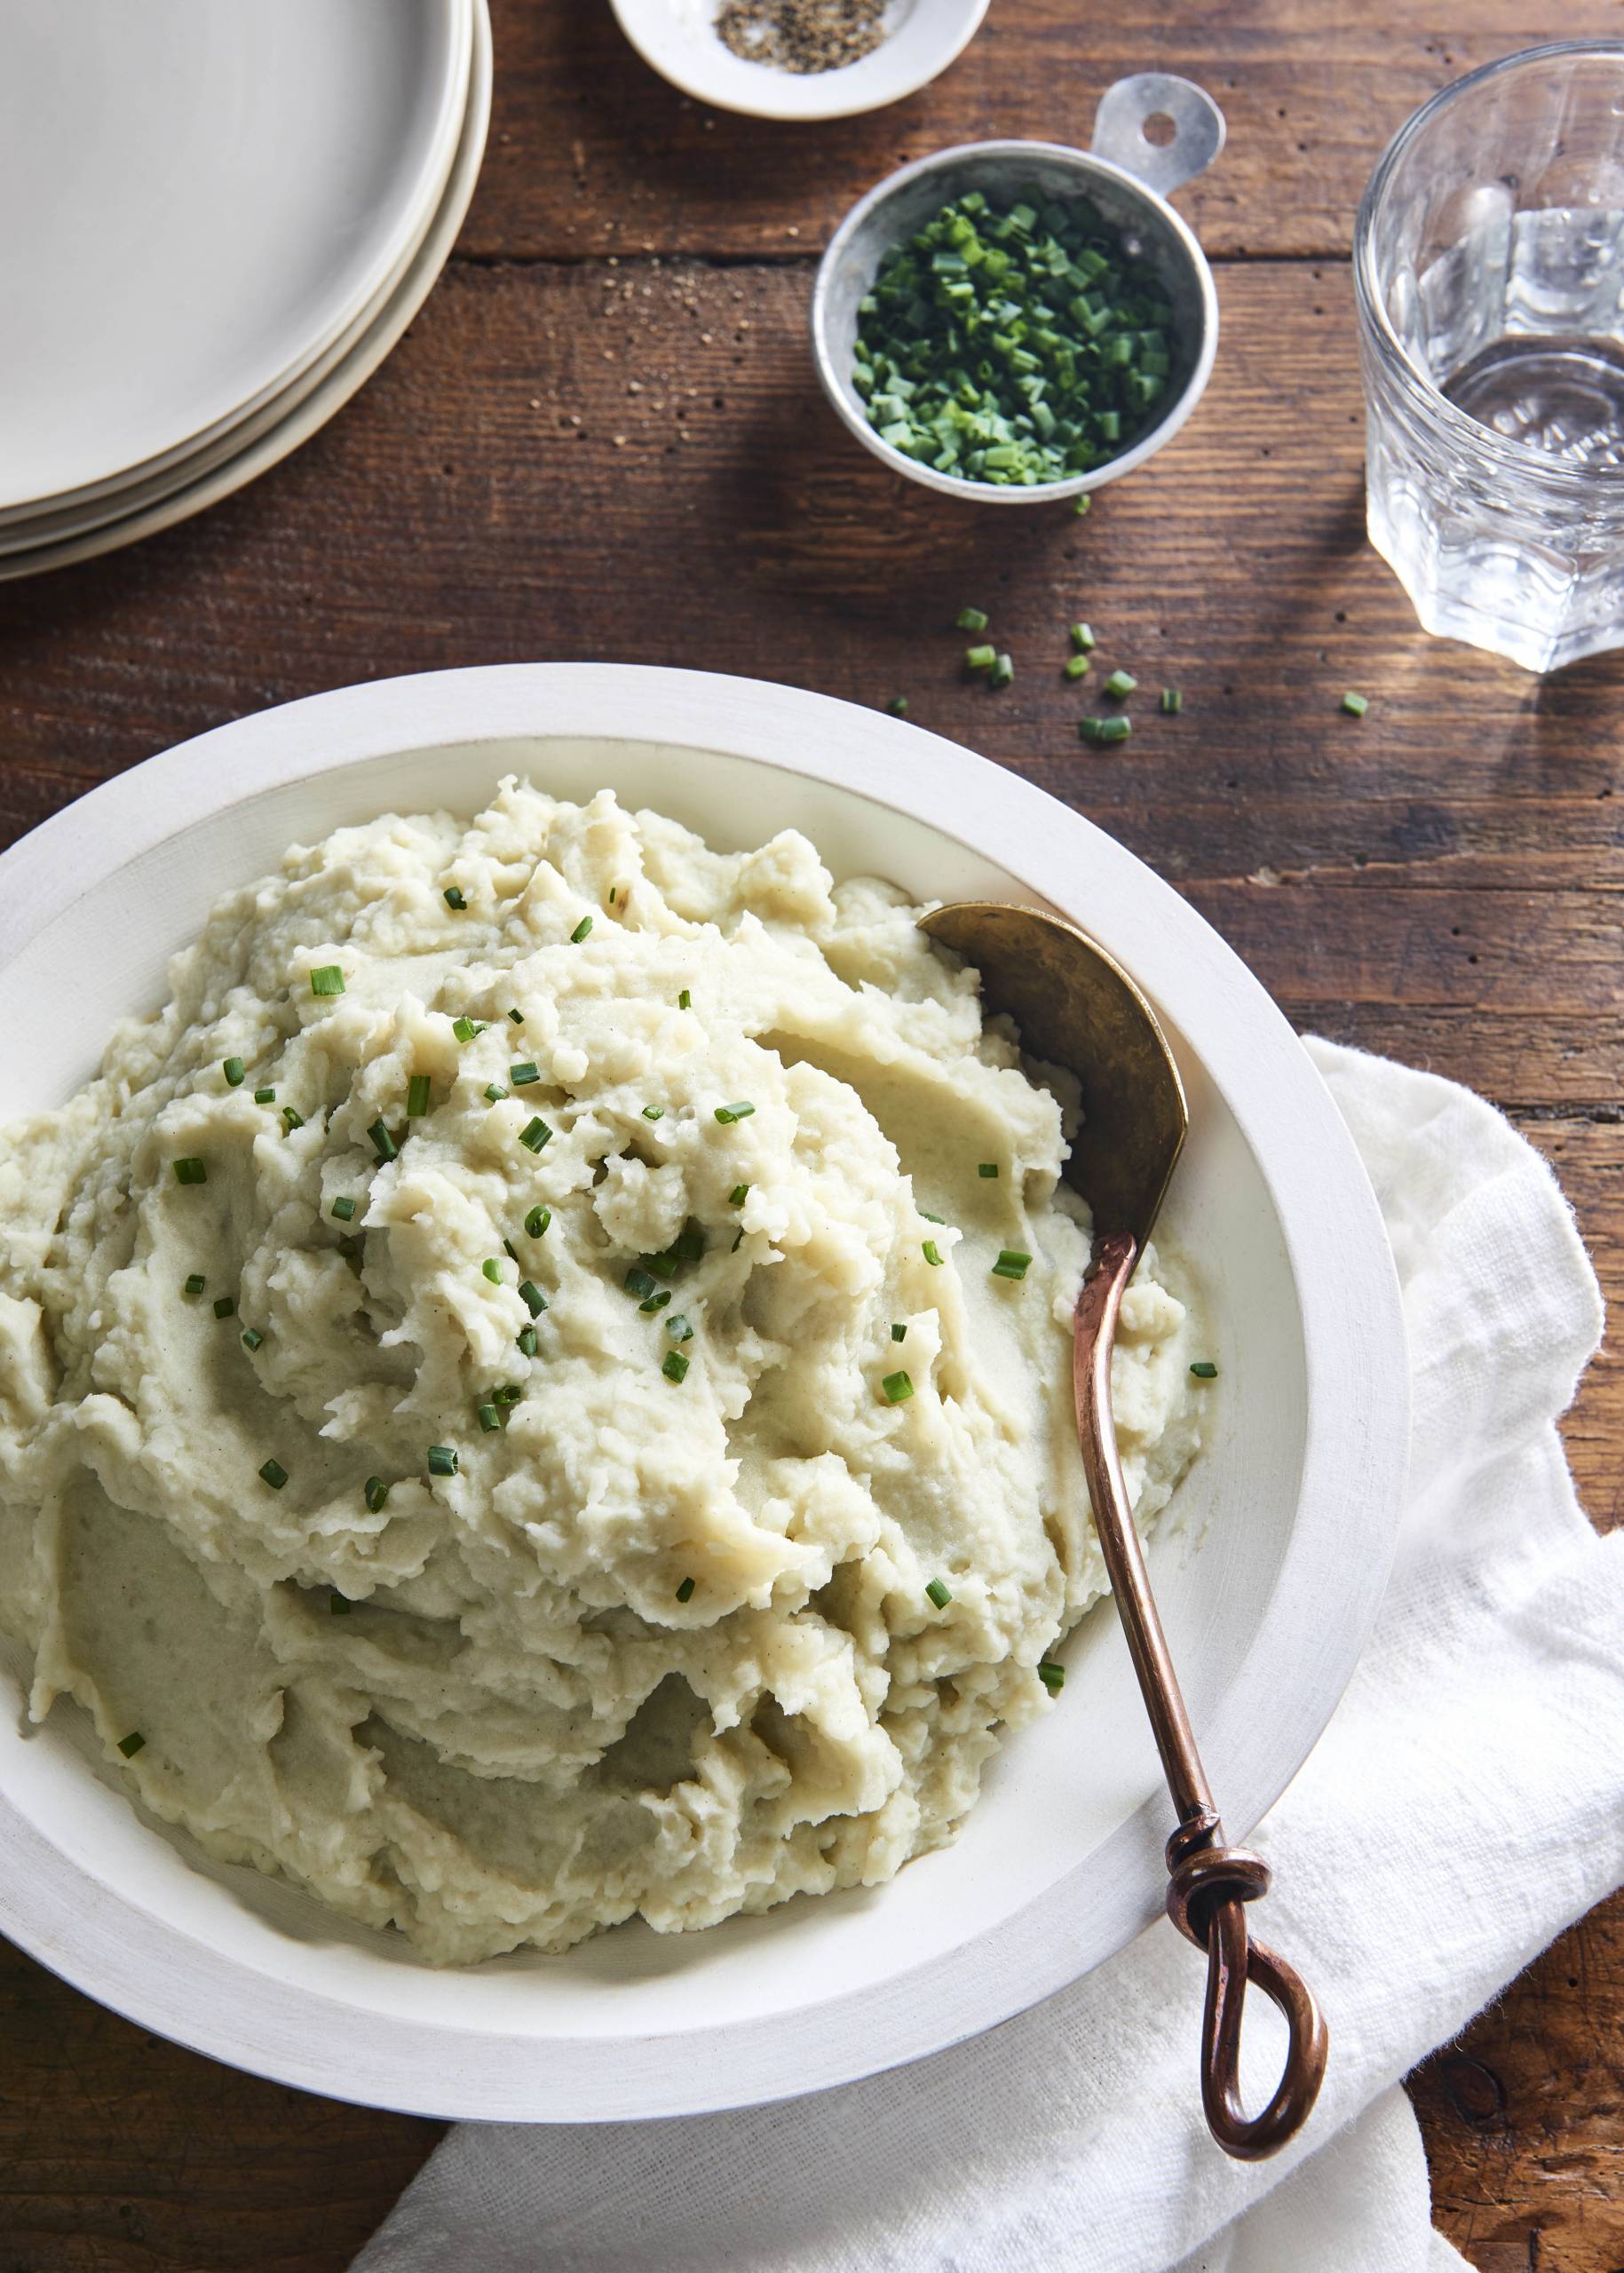 Creamy Rosemary Mashed Potatoes by Tess Masters